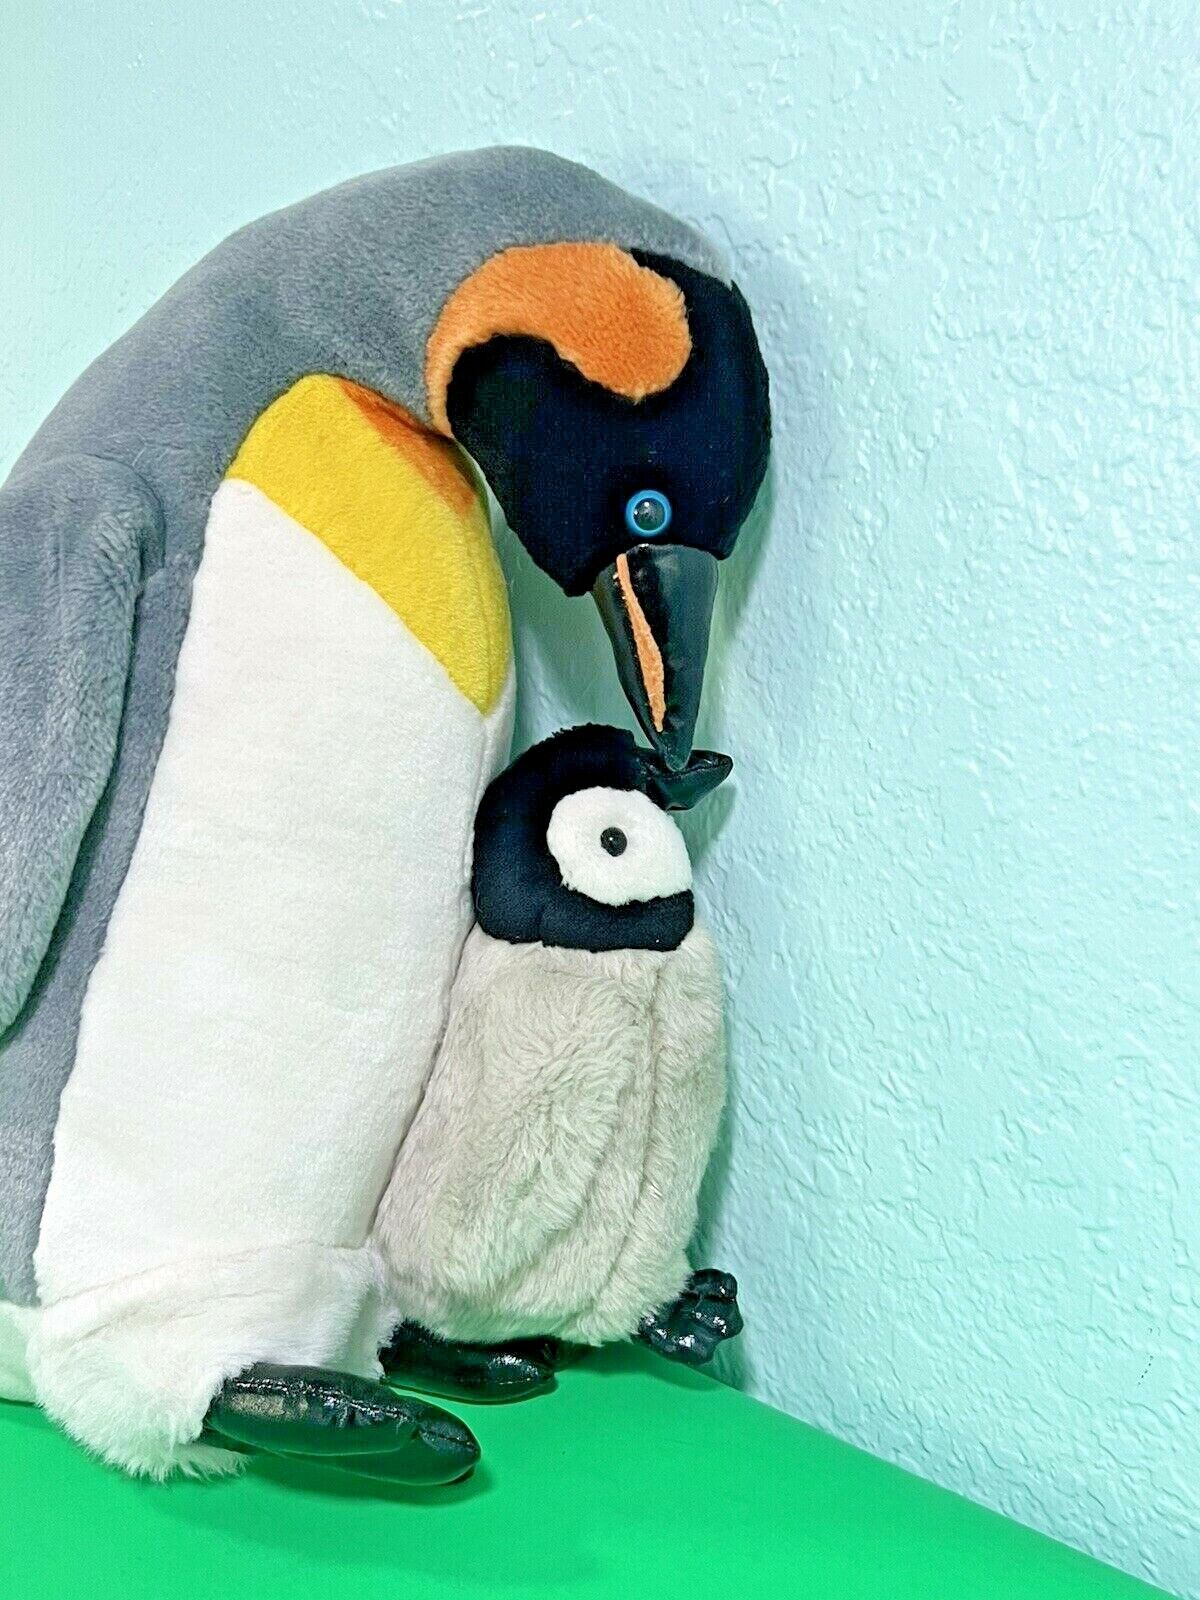 Penguin with Baby Chick Plush Stuffed Animal Artic Sea World Lovely Toy or Gift